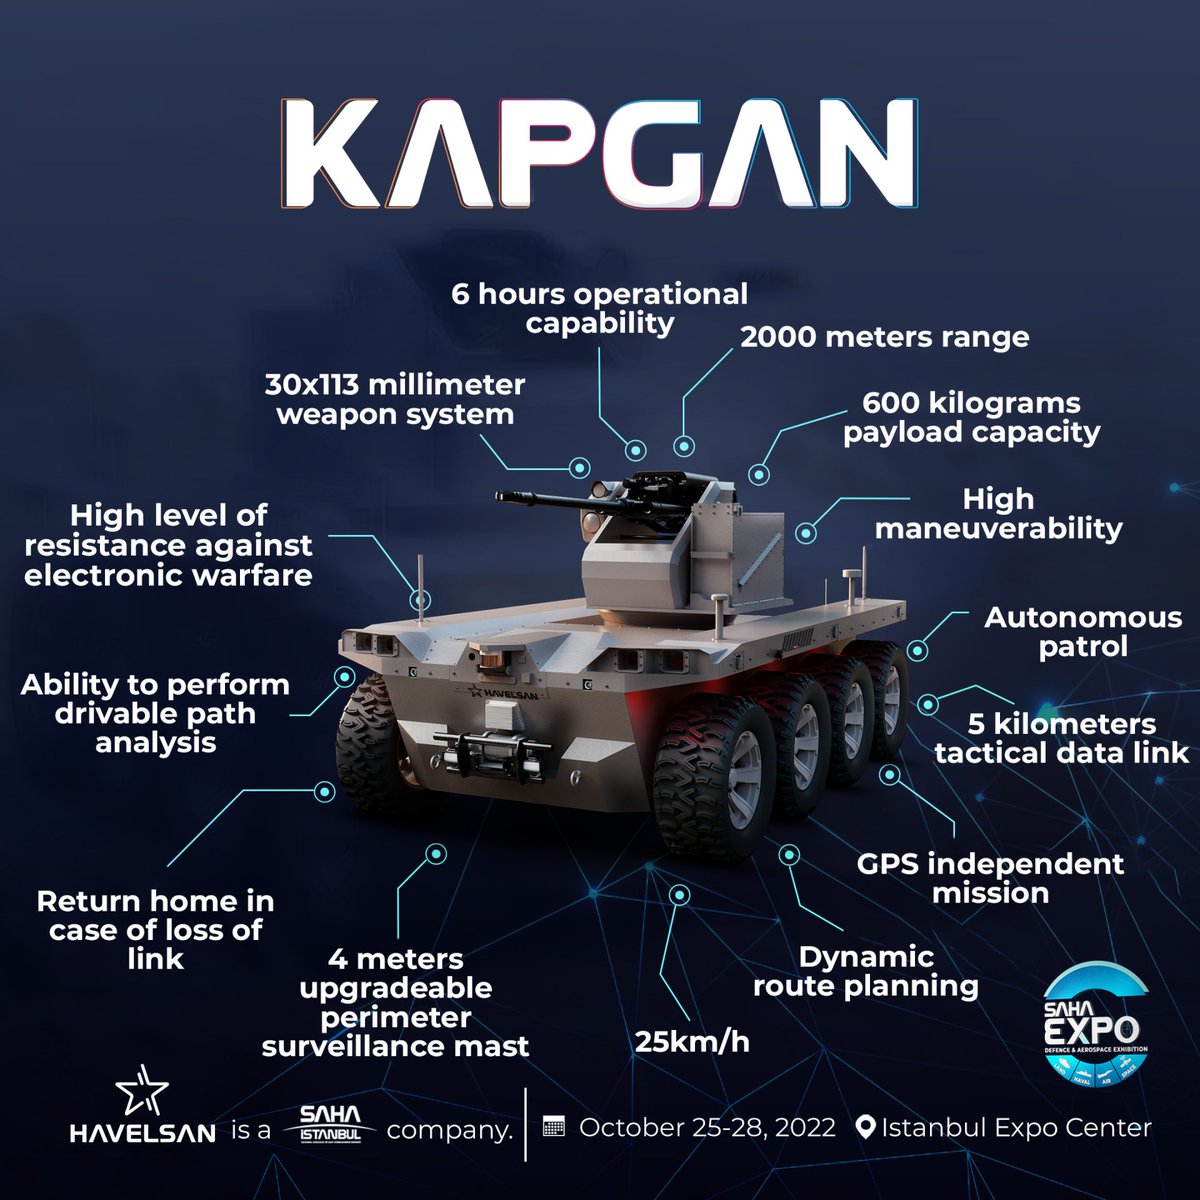 KAPGAN developed by @havelsanglobal 💢 6 hours of operational capability 💢 25km/h 💢 Return home in case of lost link 💢 GPS independent mission #SahaExpo